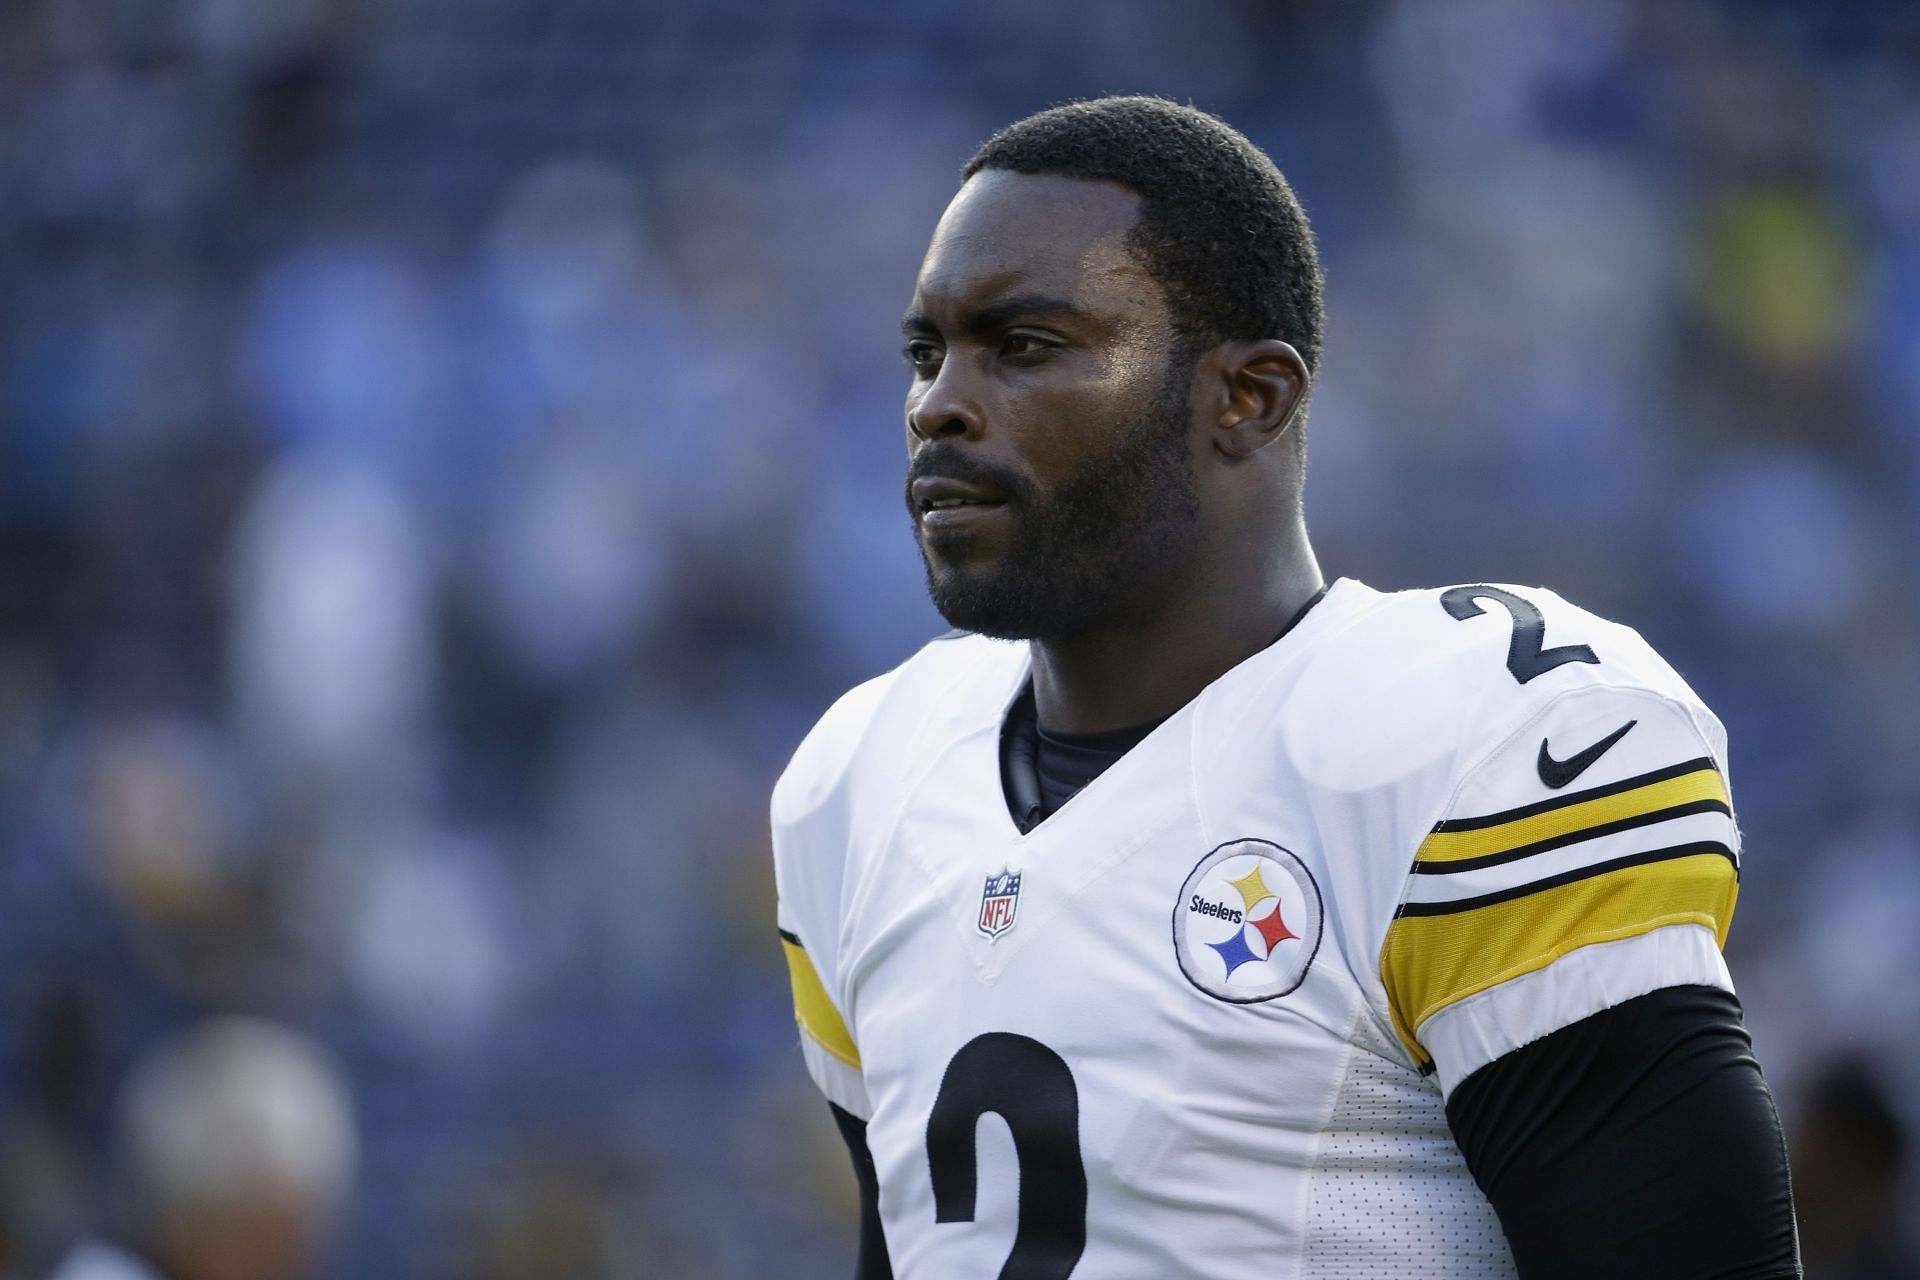 Michael Vick let people down in one of the saddest ways... hurting animals